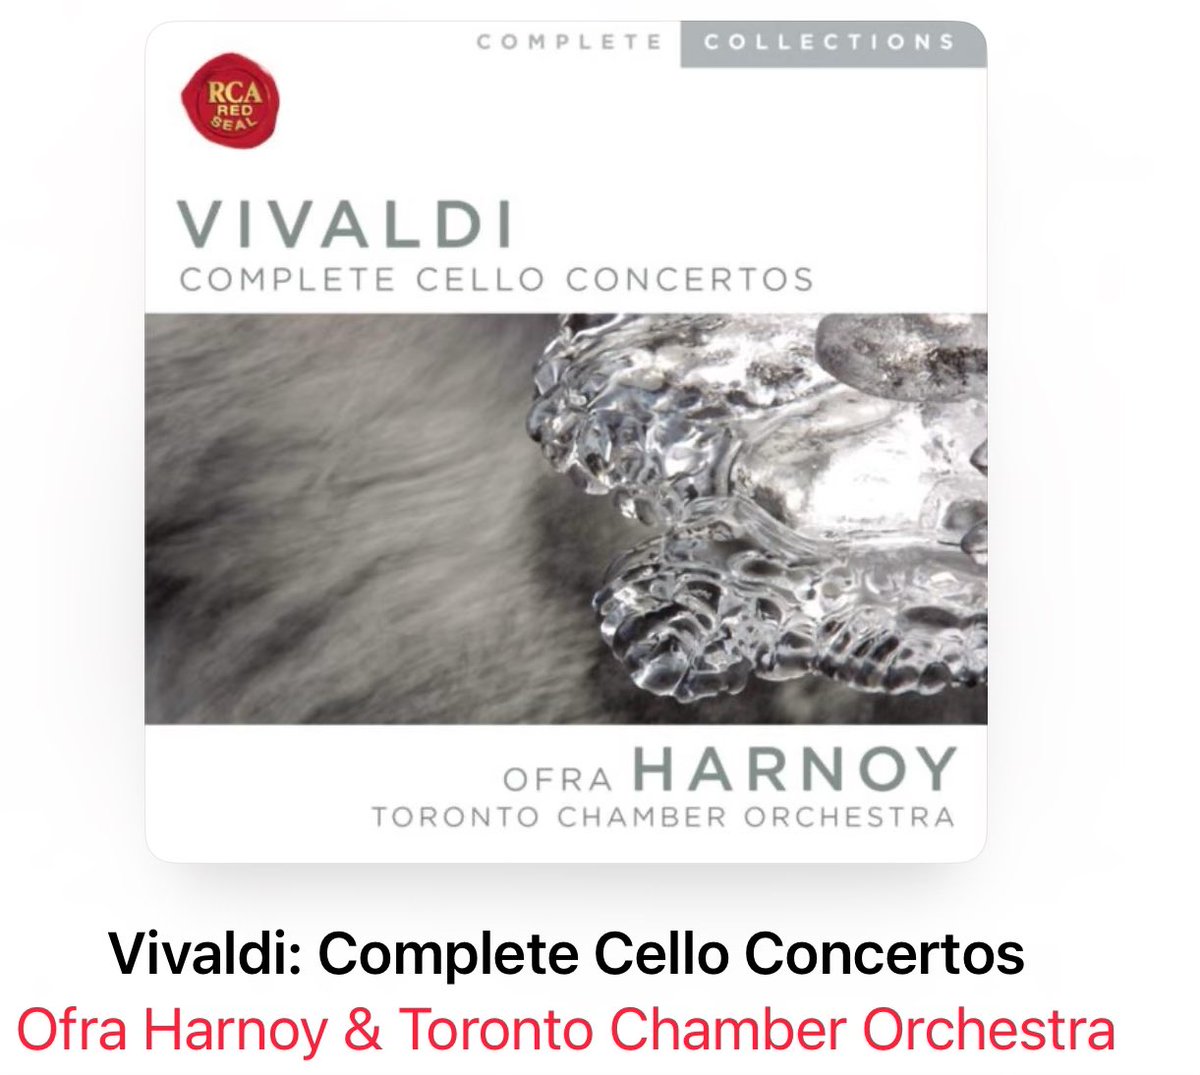 #Music #Classical Just finished playing Ofra Harnoy and the Toronto Chamber Orchestra’s recording of Vivaldi’s Complete Cello Concertos. - All 4 hours 6 minutes of it. (Aah yes, I like Vivaldi) (Never completed the entire recording since I first came across it in the early 90s)